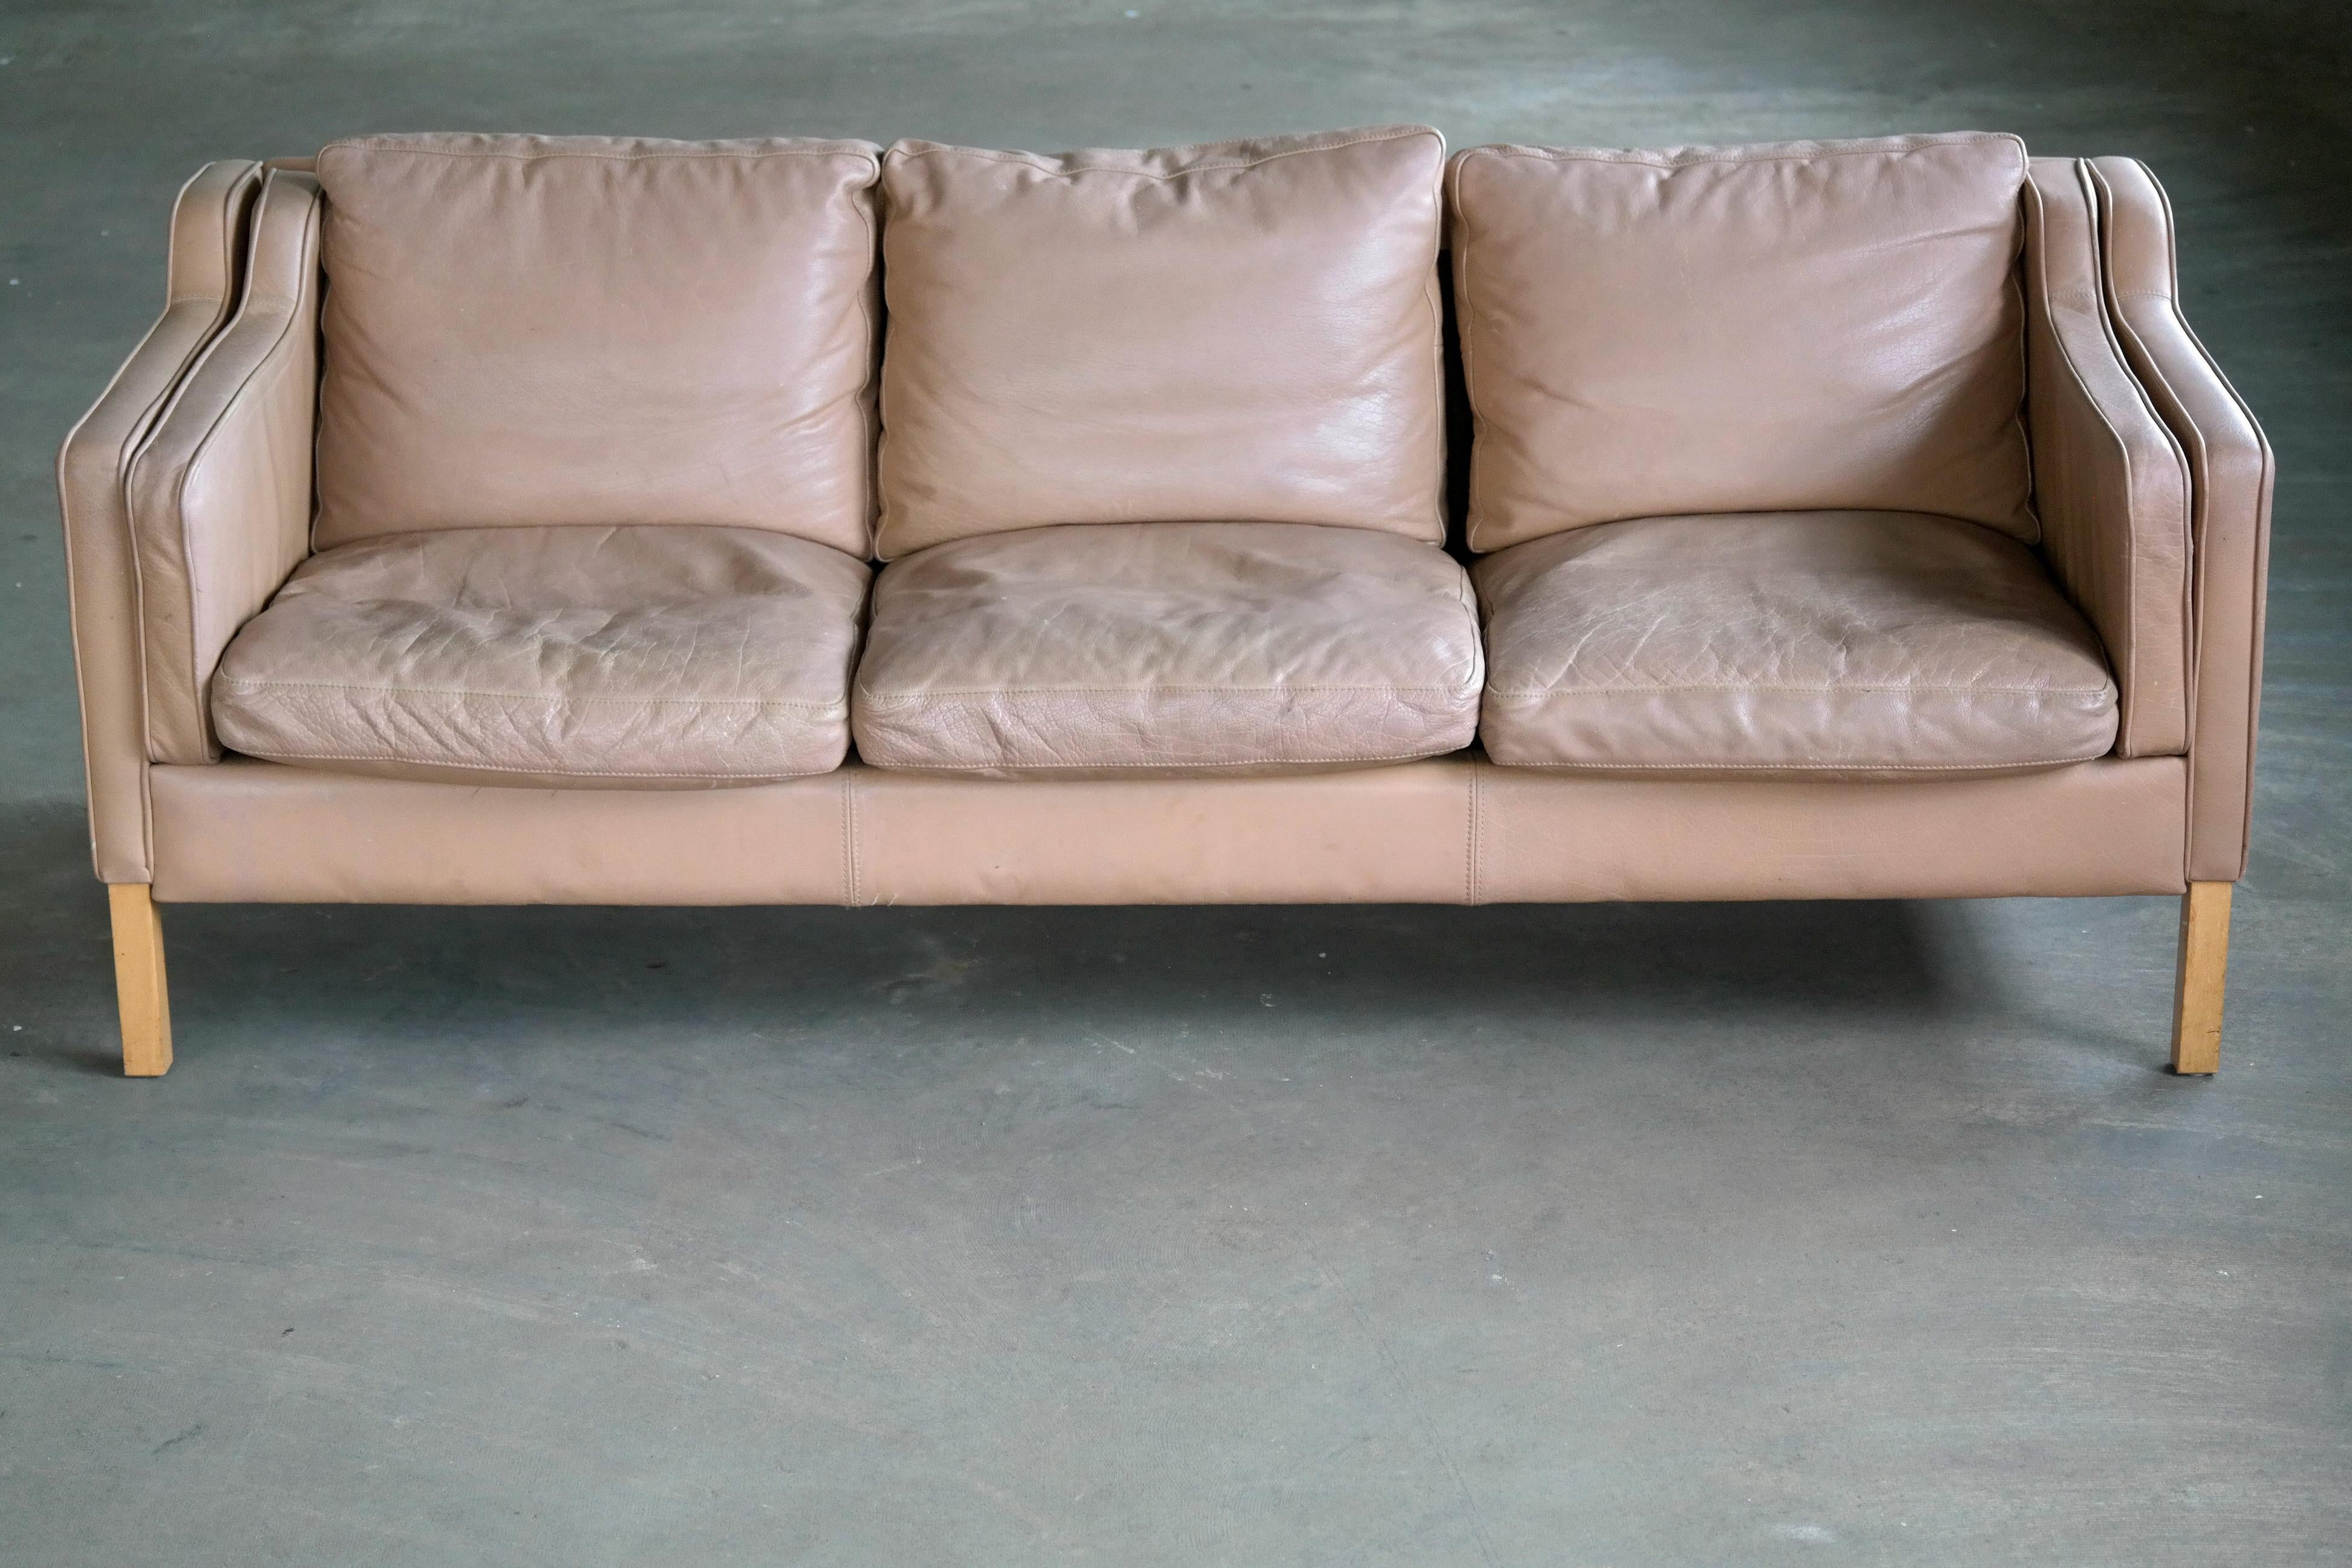 Classic Børge Mogensen Model 2213 style 3-sear sofa in tan leather. The sofa is unmarked but of high quality and made in Denmark probably sometime in the 1970s. Perfect for the buyer that is looking for a nice worn-in look and patina. Some wear and